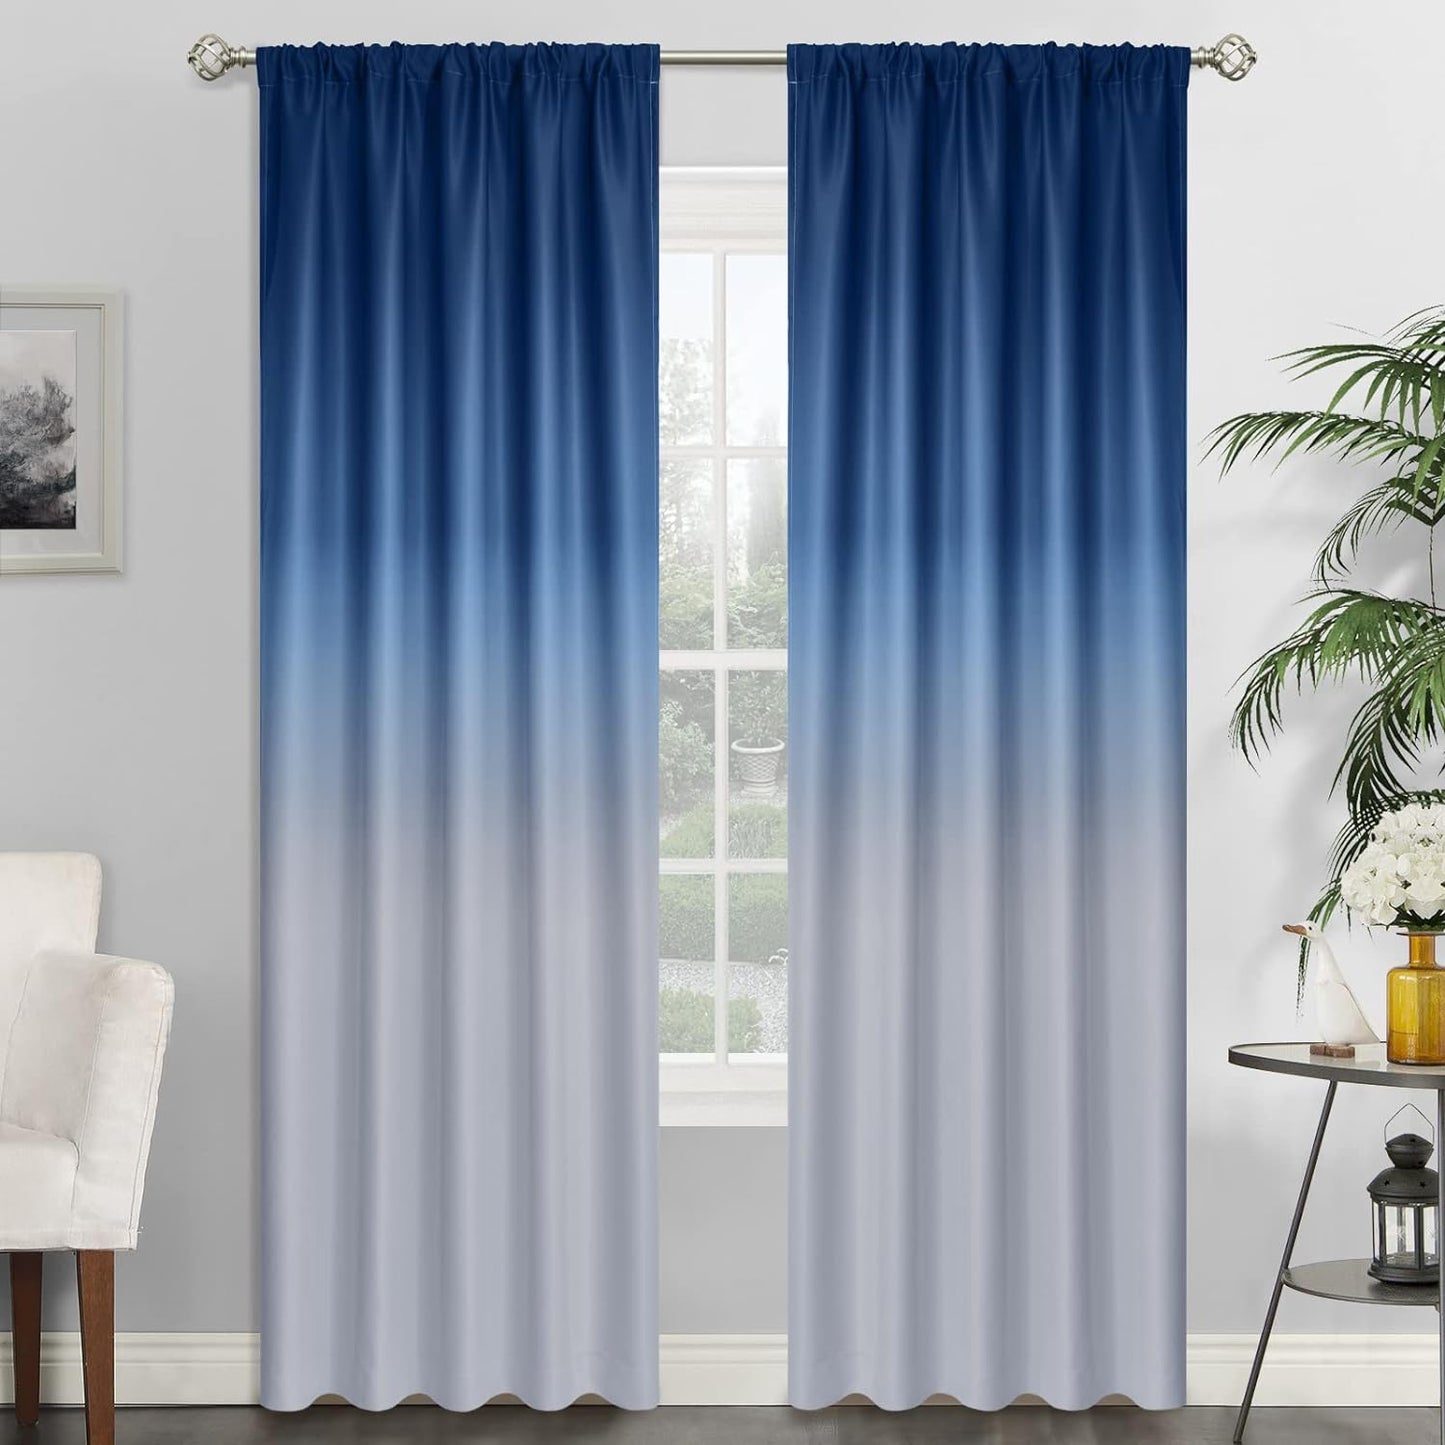 Simplehome Ombre Room Darkening Curtains for Bedroom, Light Blocking Gradient Purple to Greyish White Thermal Insulated Rod Pocket Window Curtains Drapes for Living Room,2 Panels, 52X84 Inches Length  SimpleHome Blue 1 52W X 84L / 2 Panels 